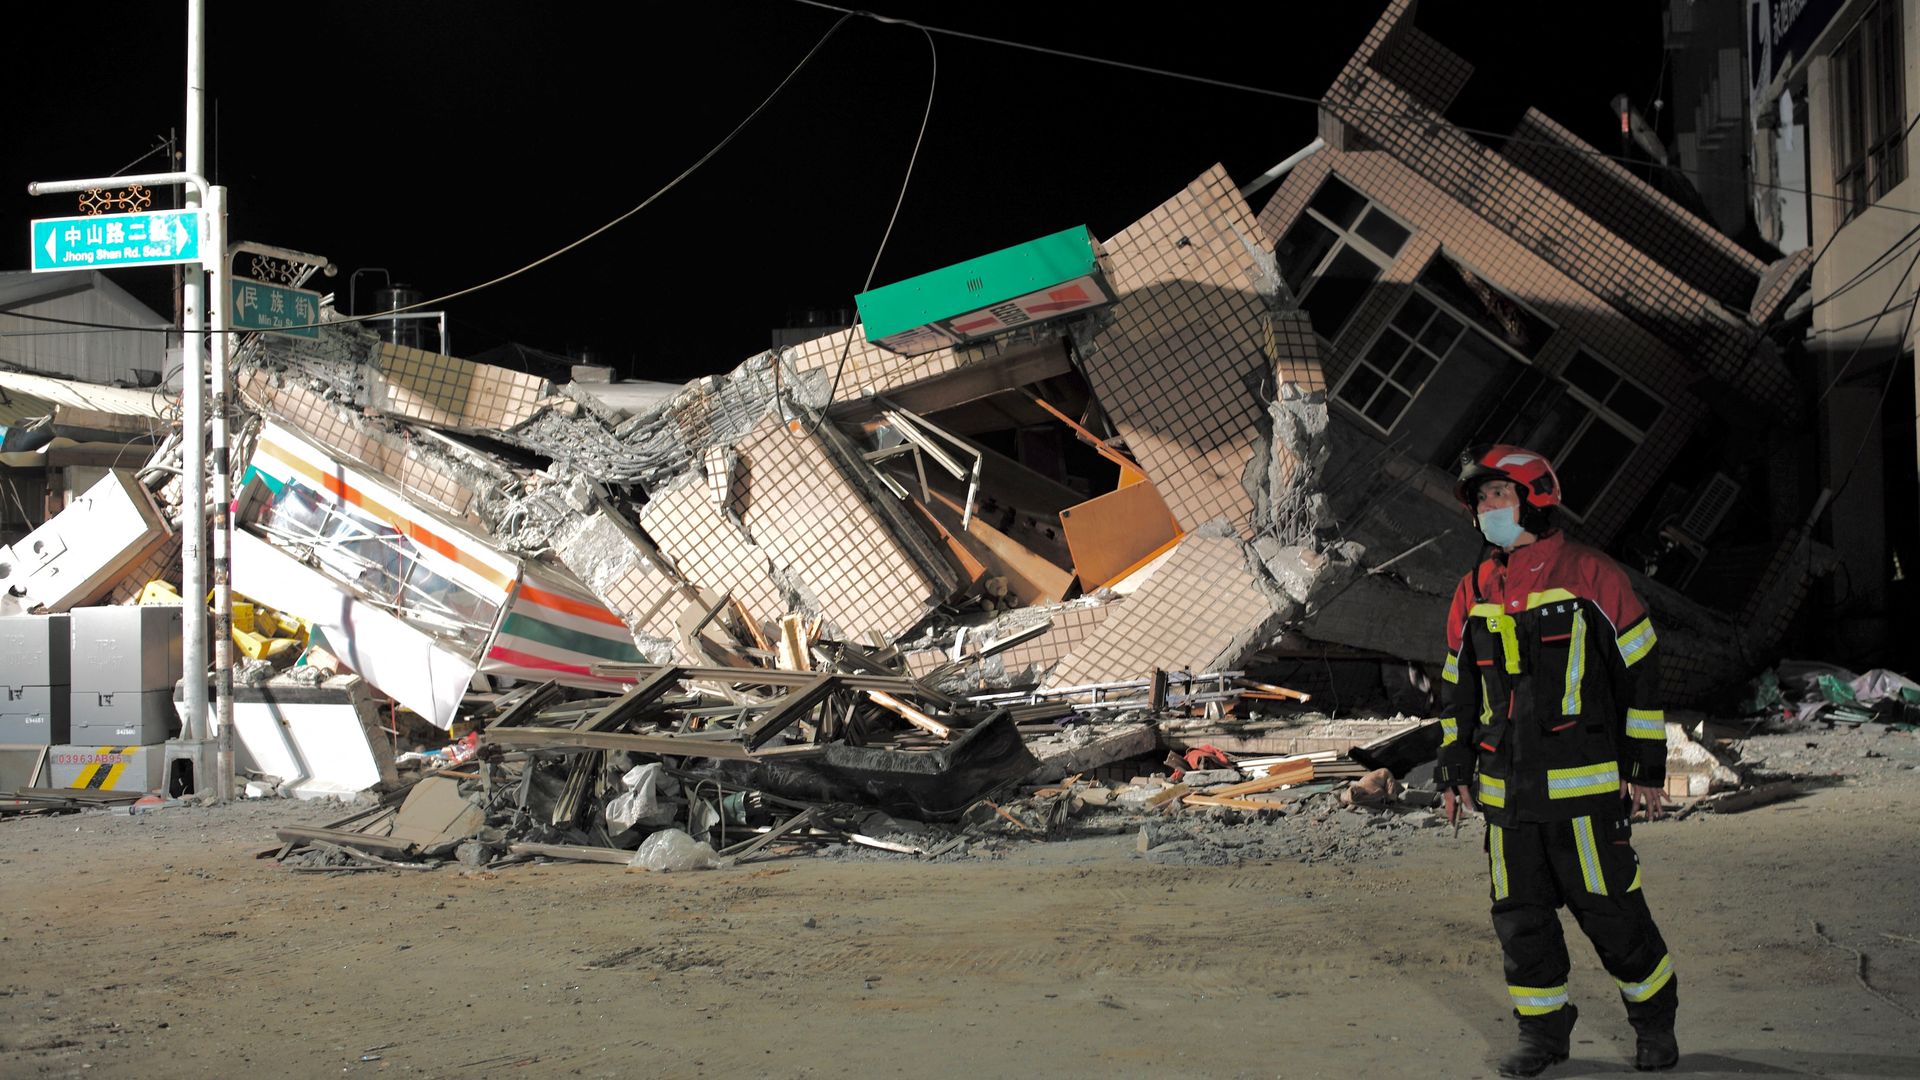 A rescuer walking past a collapsed building after an earthquake at Yuli, Taiwan, on Sept. 18.